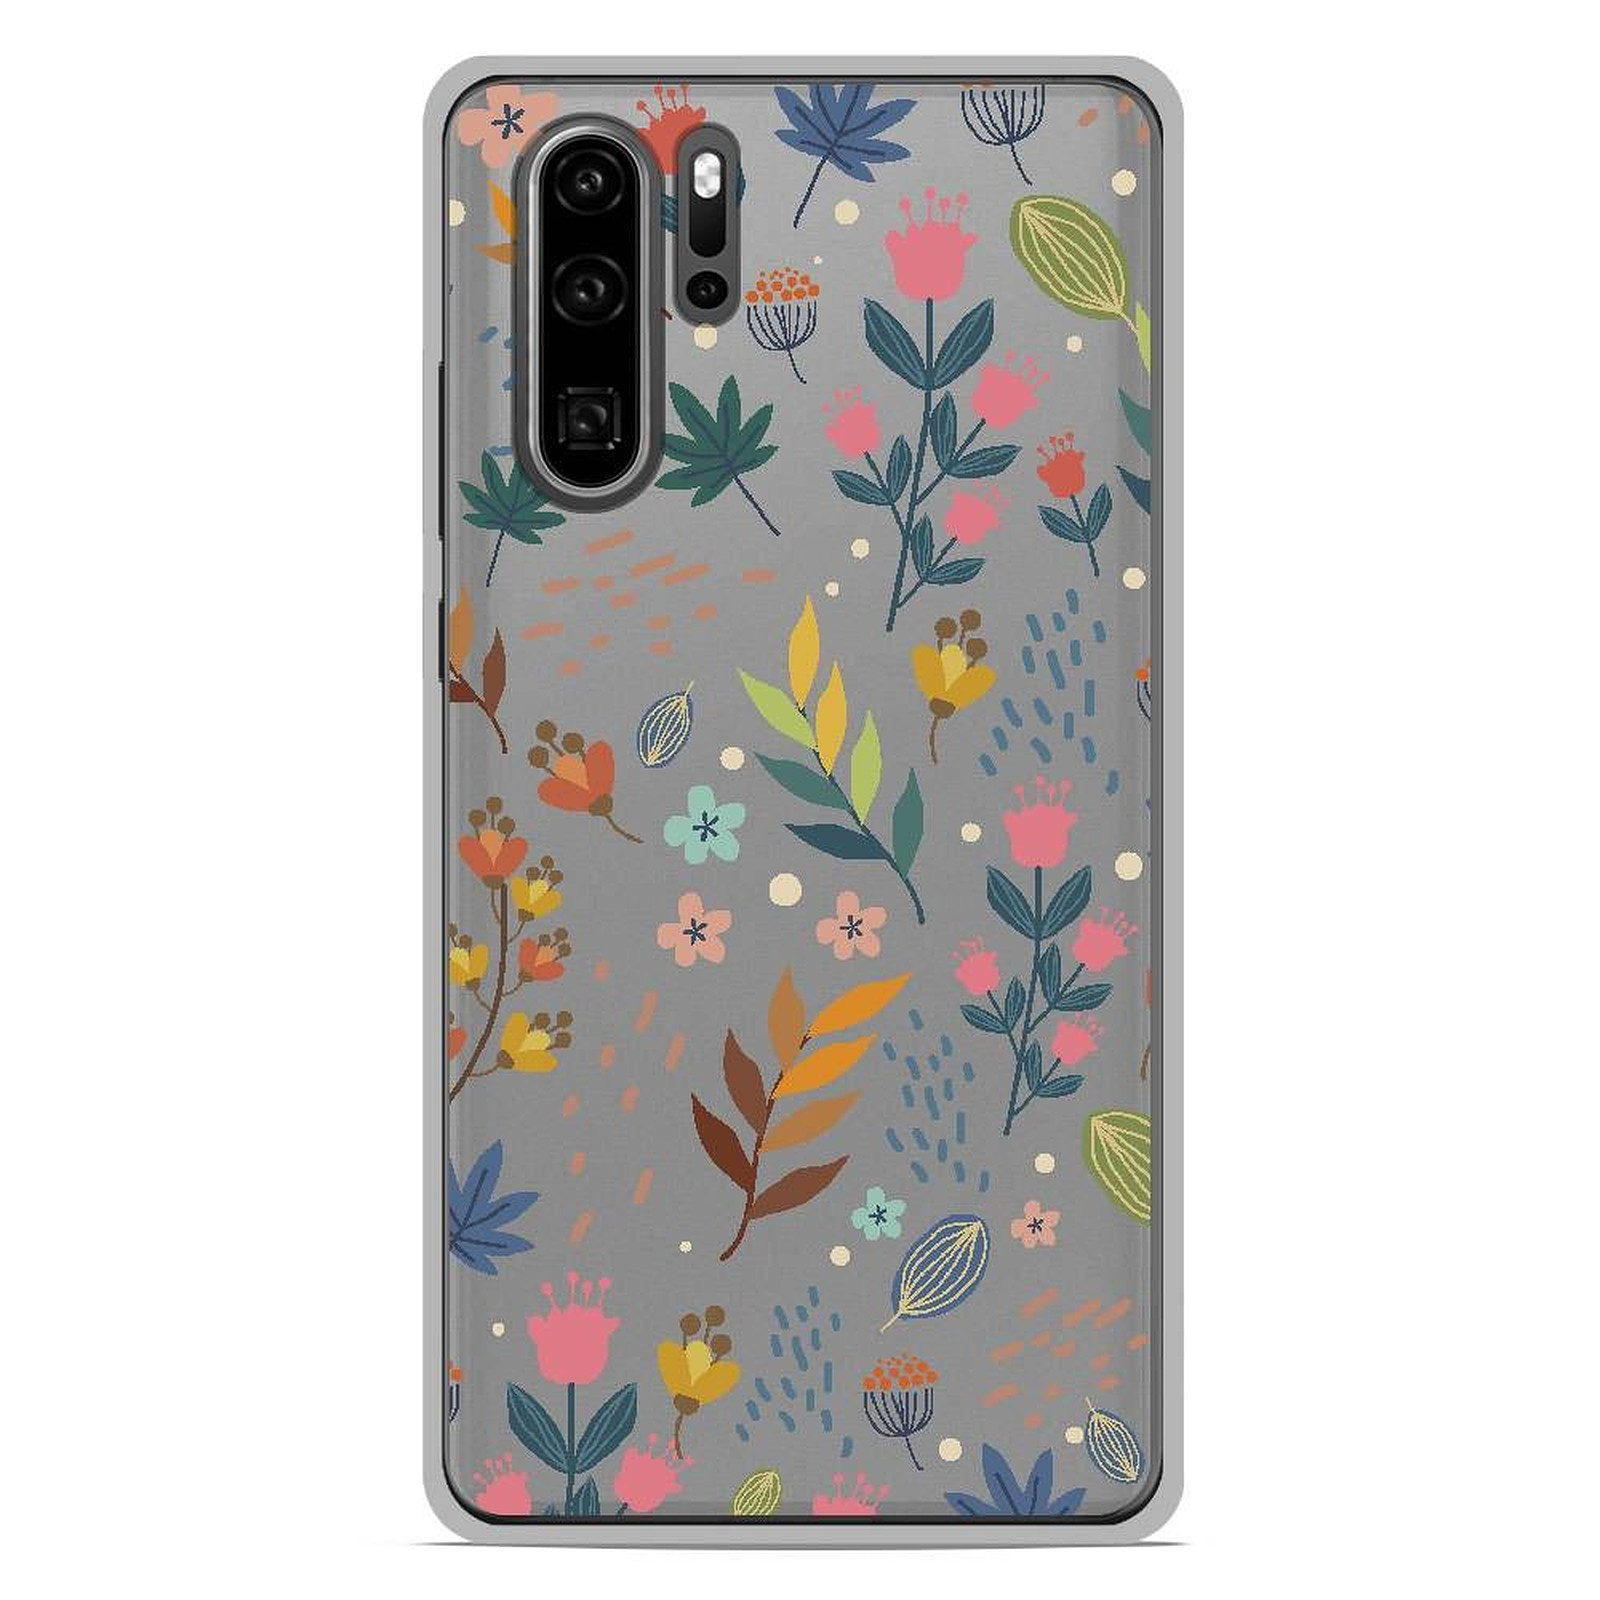 1001 Coques Coque silicone gel Huawei P30 Pro motif Fleurs colorees - Coque telephone 1001Coques